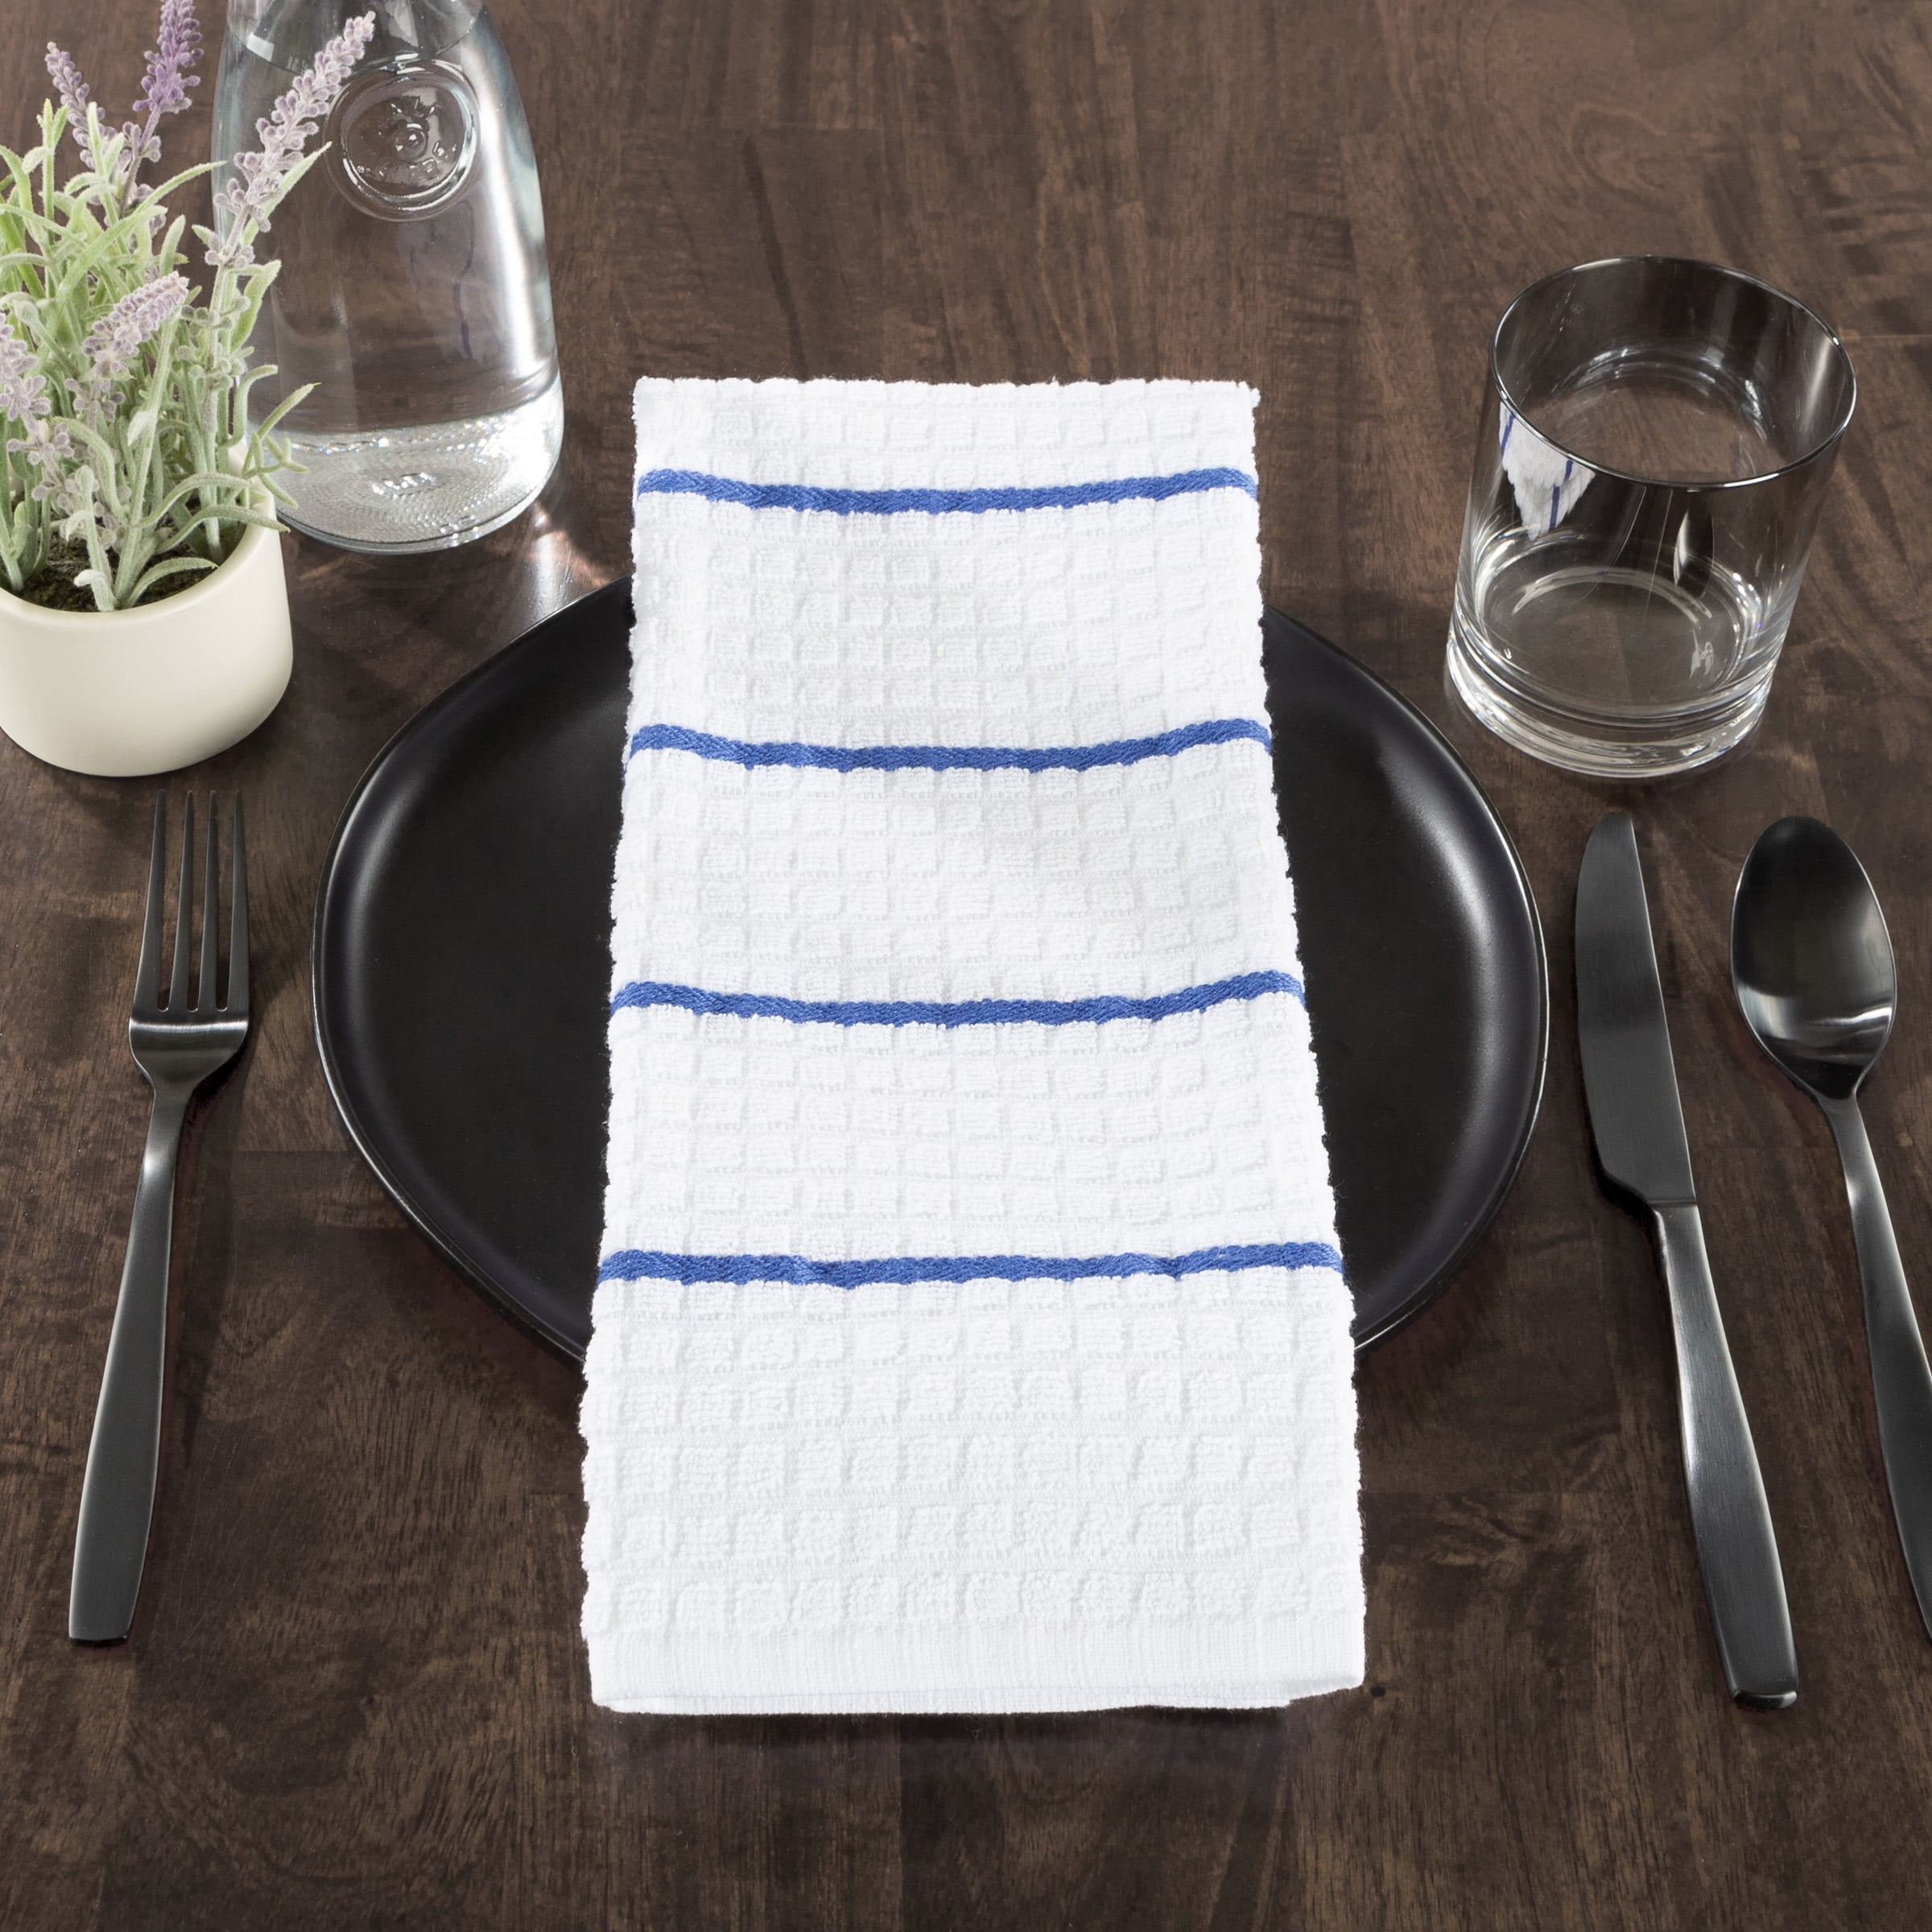 Dish Towels Dual Purpose Reversible, 100% Absorbent Cotton, Kitchen Towels  Set of 3 Striped, 17 x 30, 3-Pack Black All-Clad Textiles